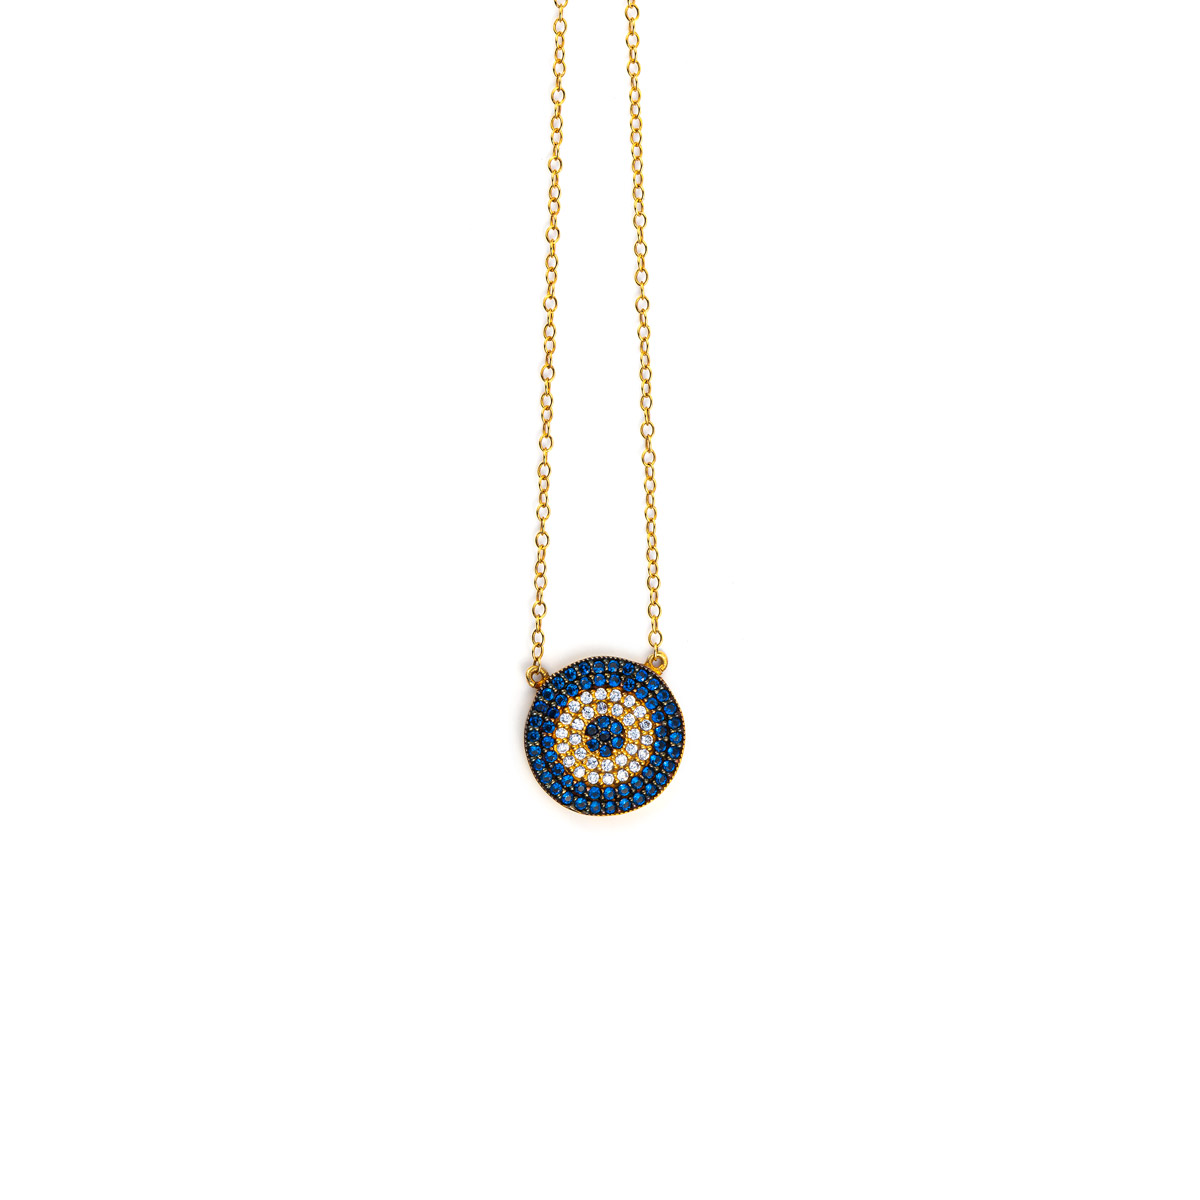 Evil Eye Necklace - 925 Silver and Gold Plated with Zircon